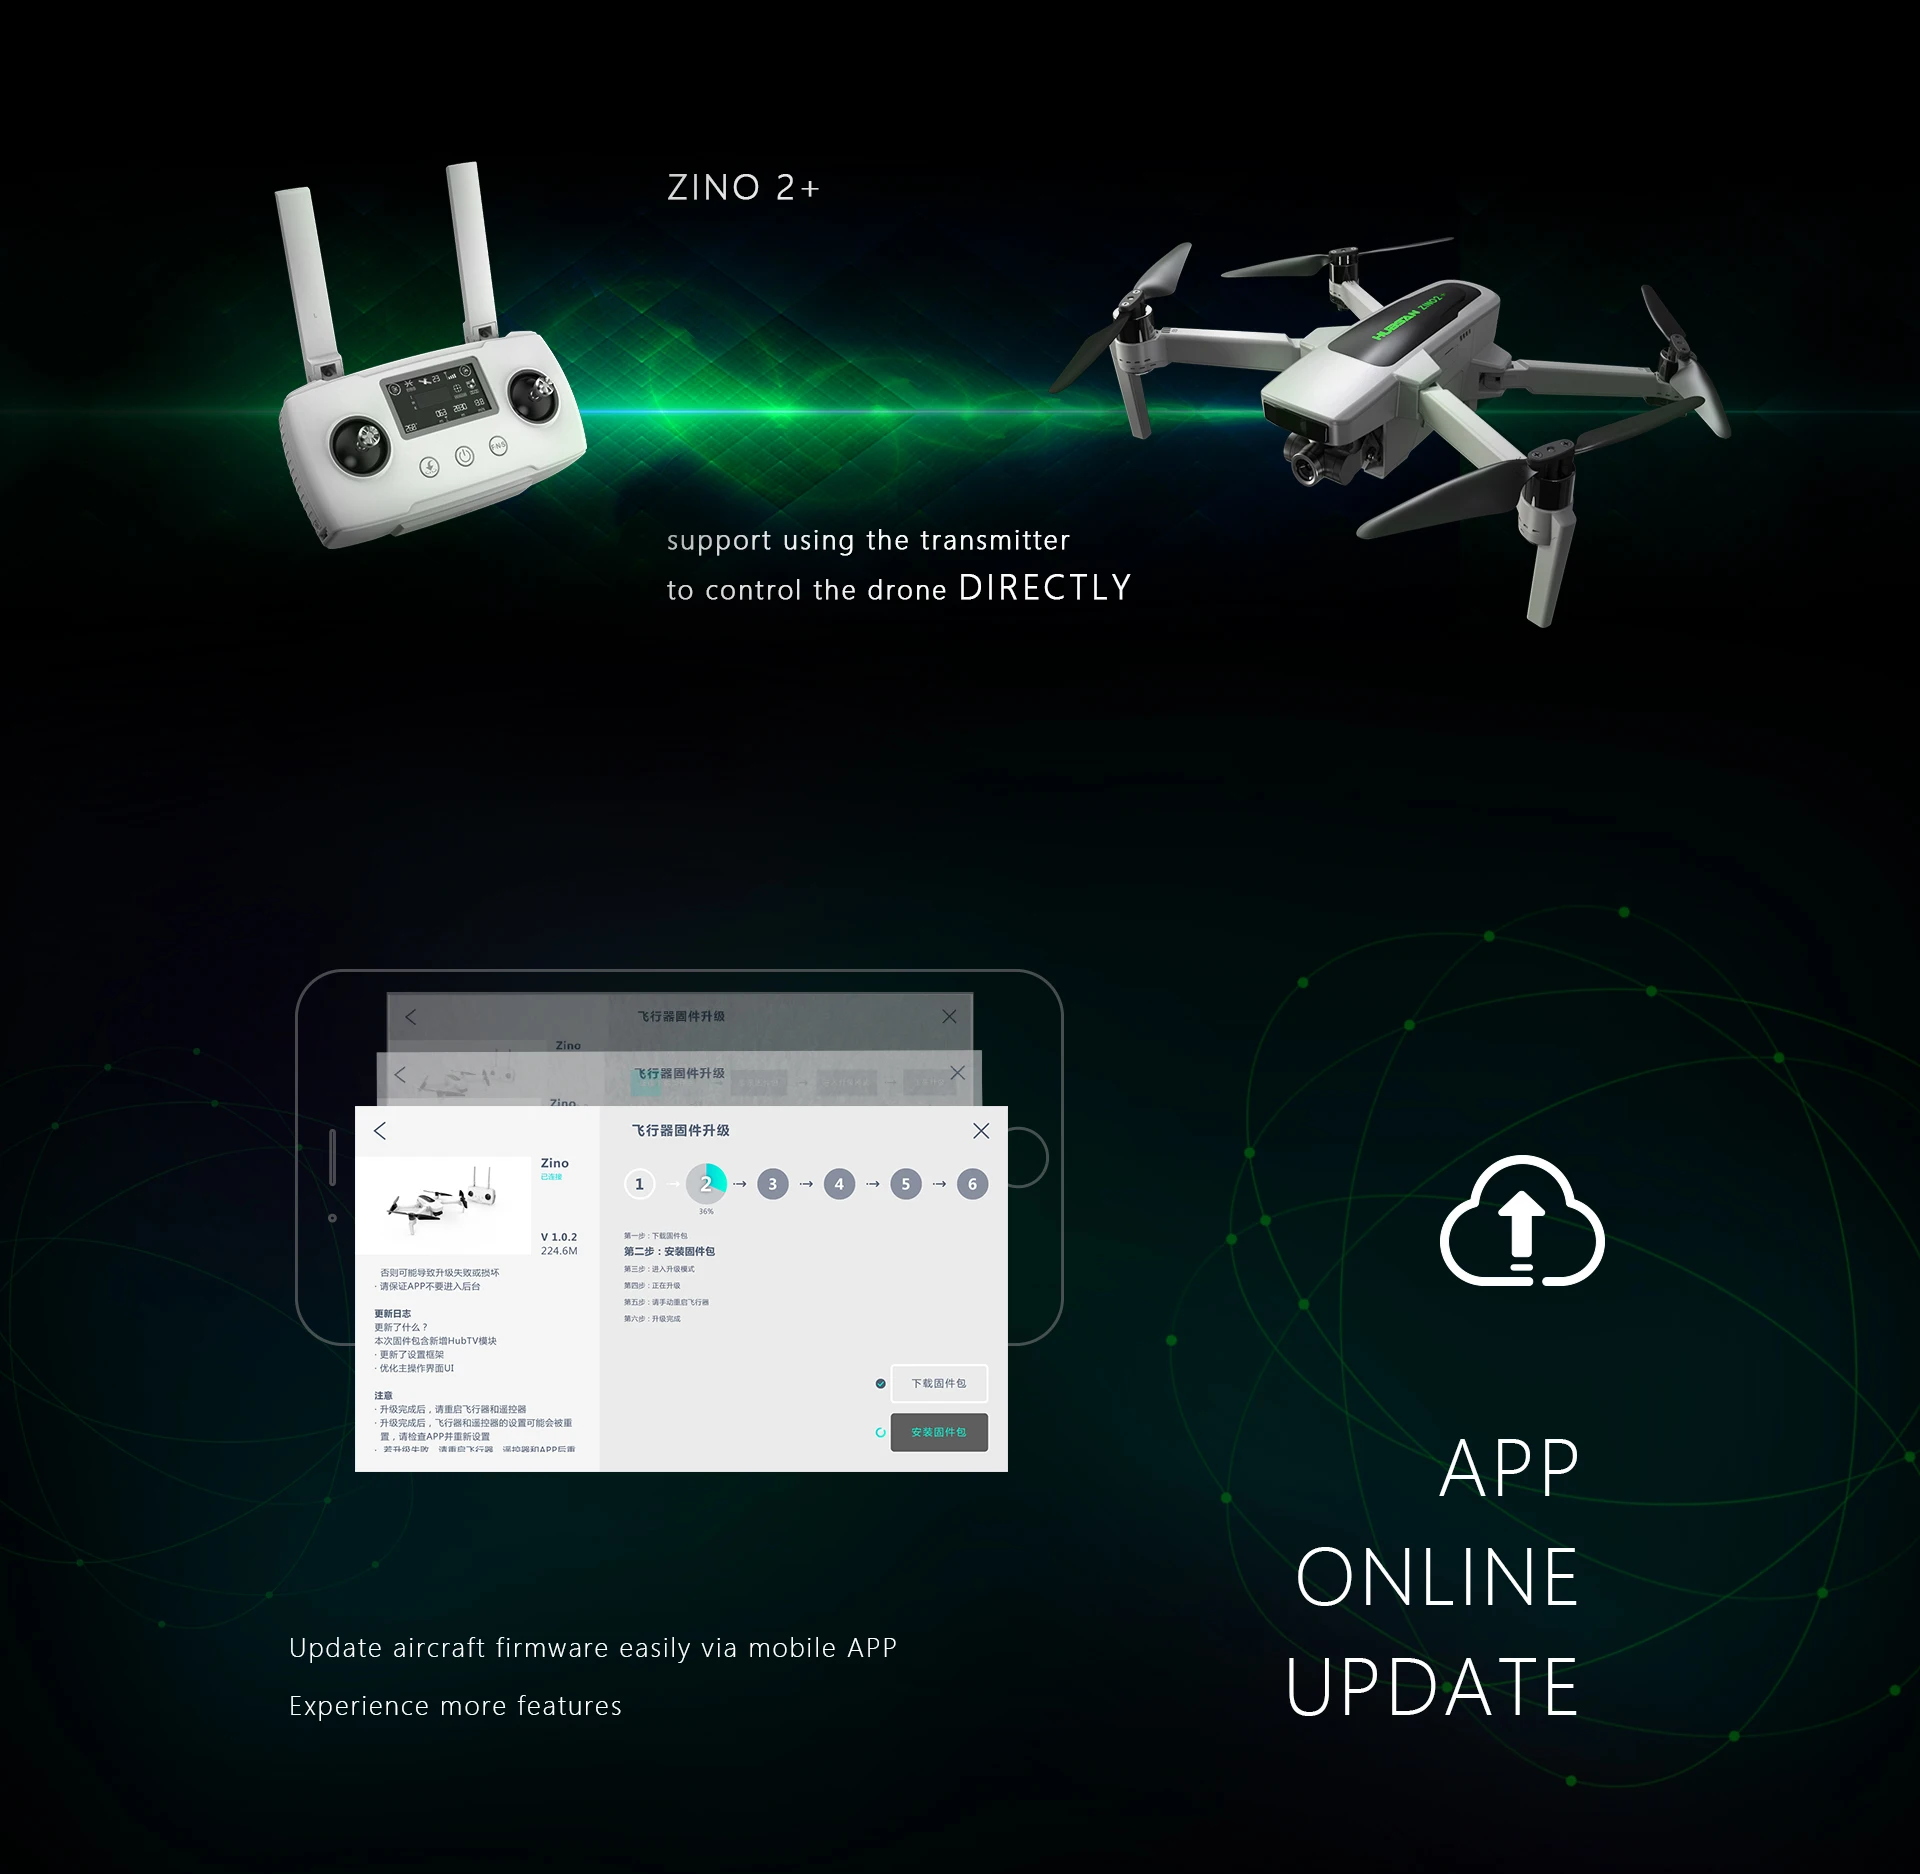 Hubsan Zino 2 Plus Drone, ZINO 2 + 60 0 Support using the transmitter to control the drone DIRECTLY